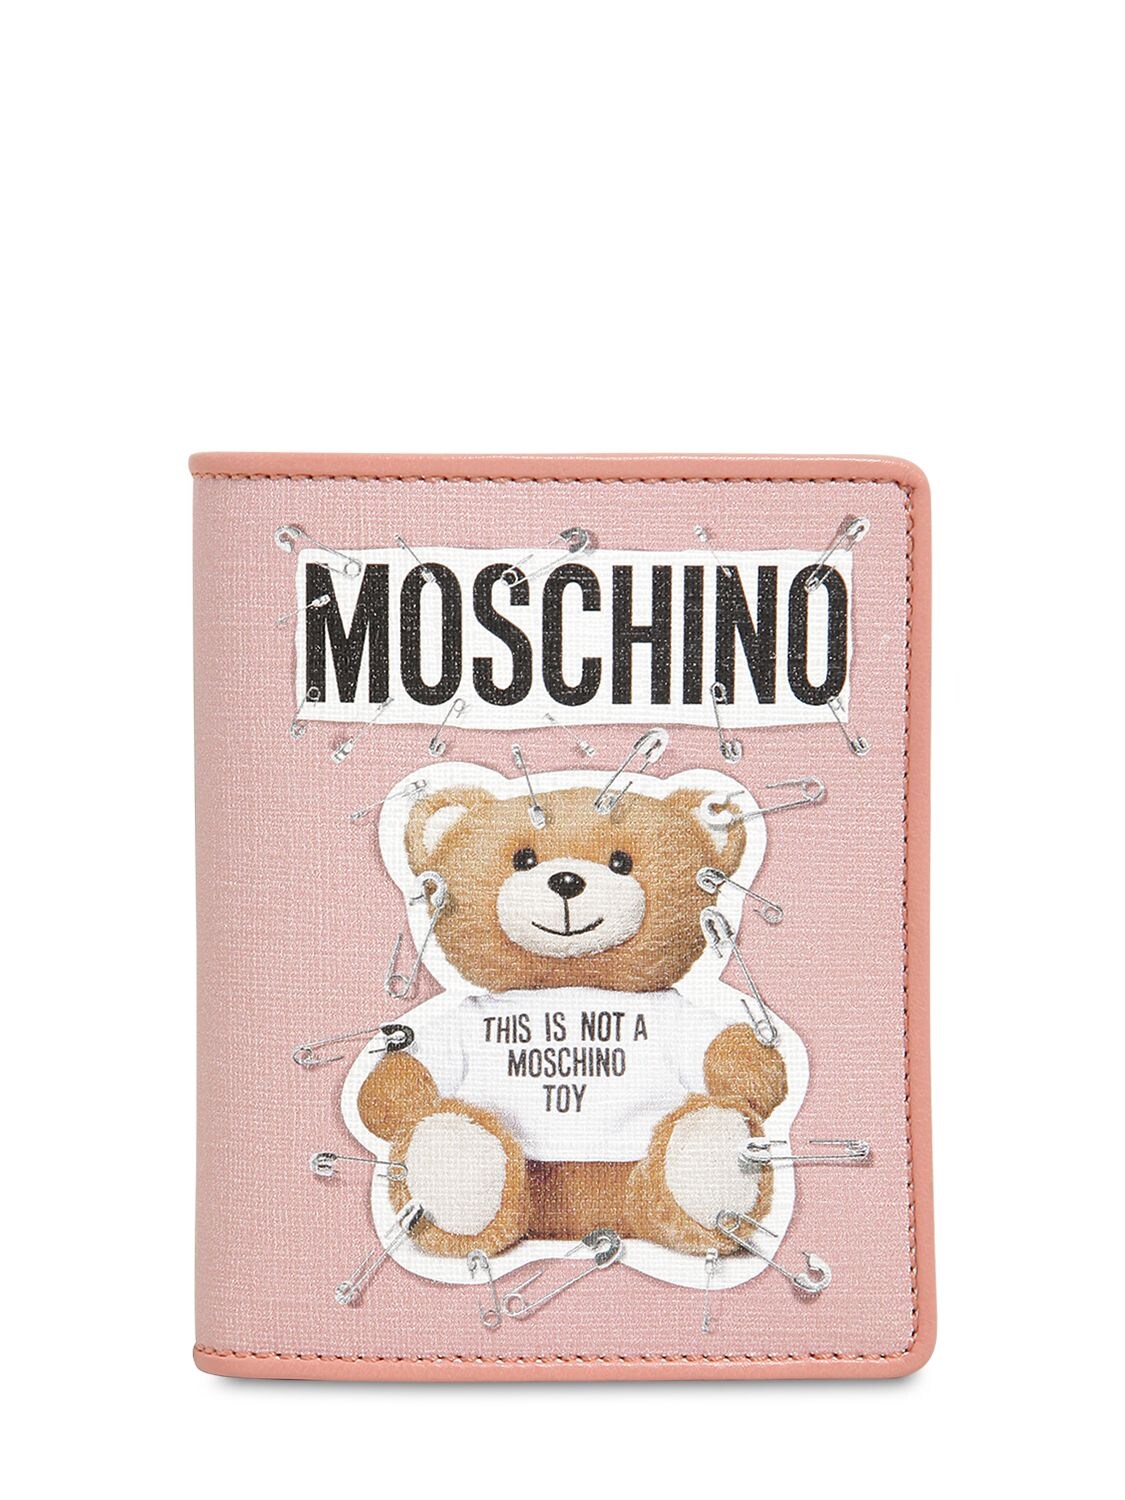 MOSCHINO TEDDY BEAR PRINTED SNAP WALLET,68IL0M004-MTE0Nw2